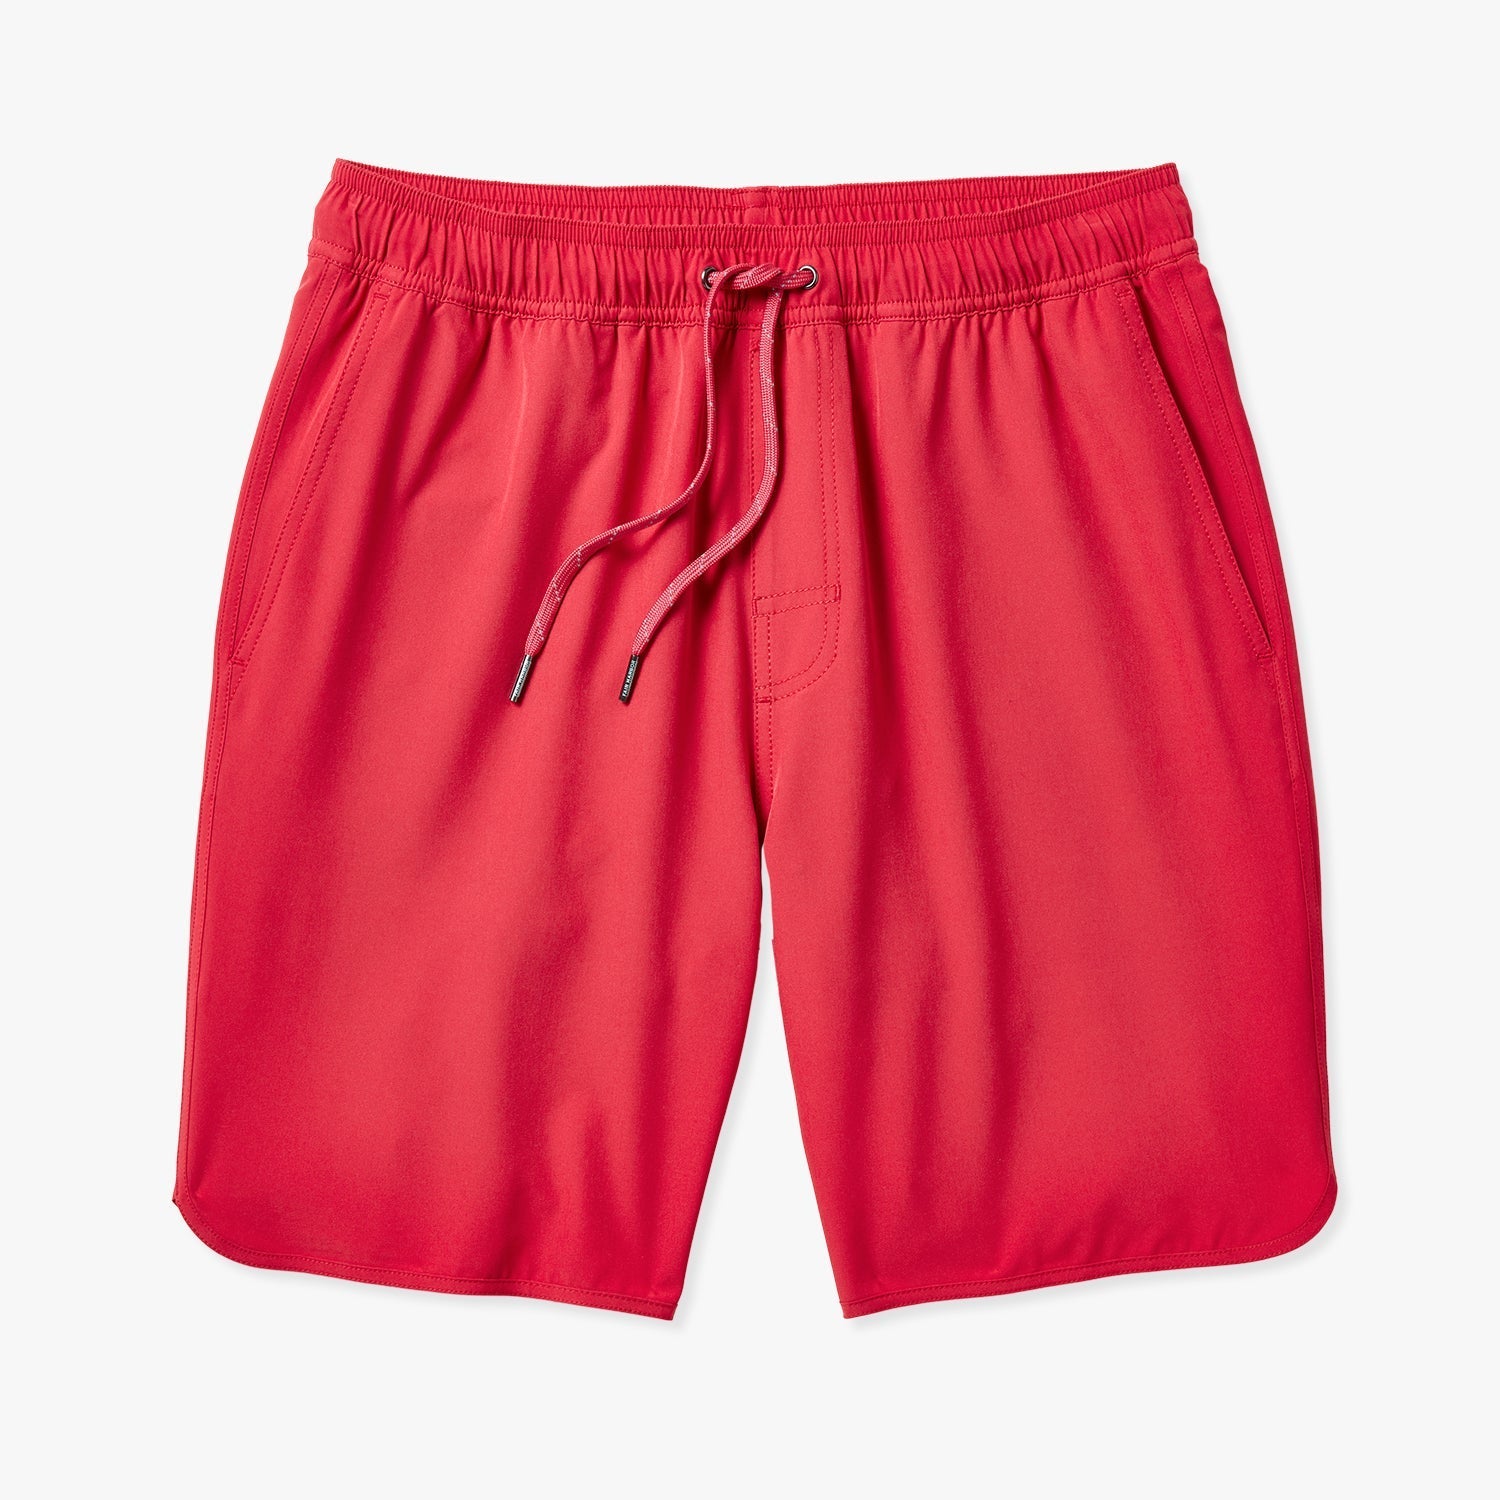 The Anchor Short | Swim Suit With Liners | Fair Harbor